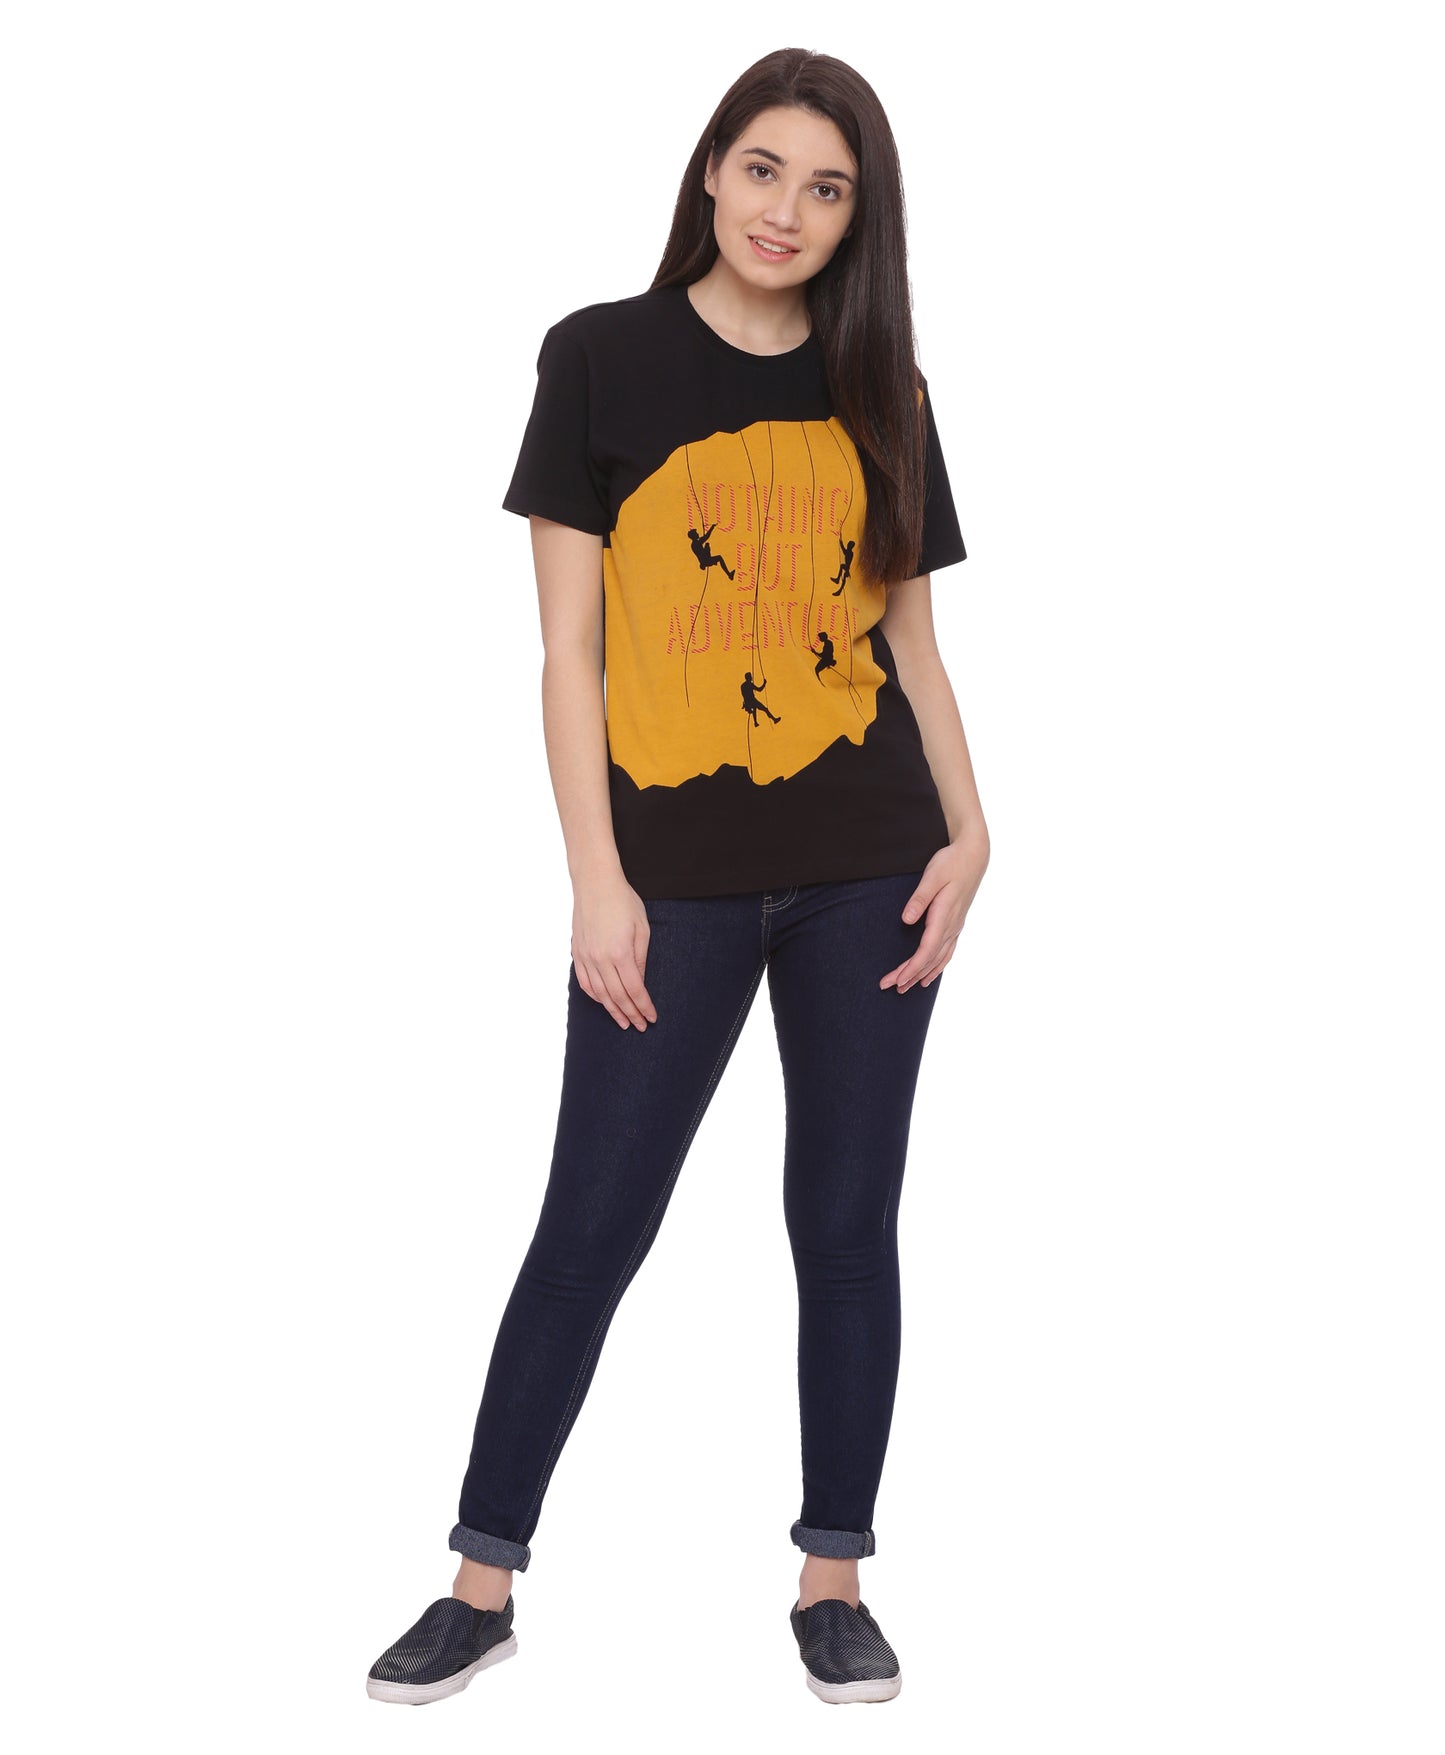 Wolfpack Women Black and Yellow Printed T-Shirt Wolfpack